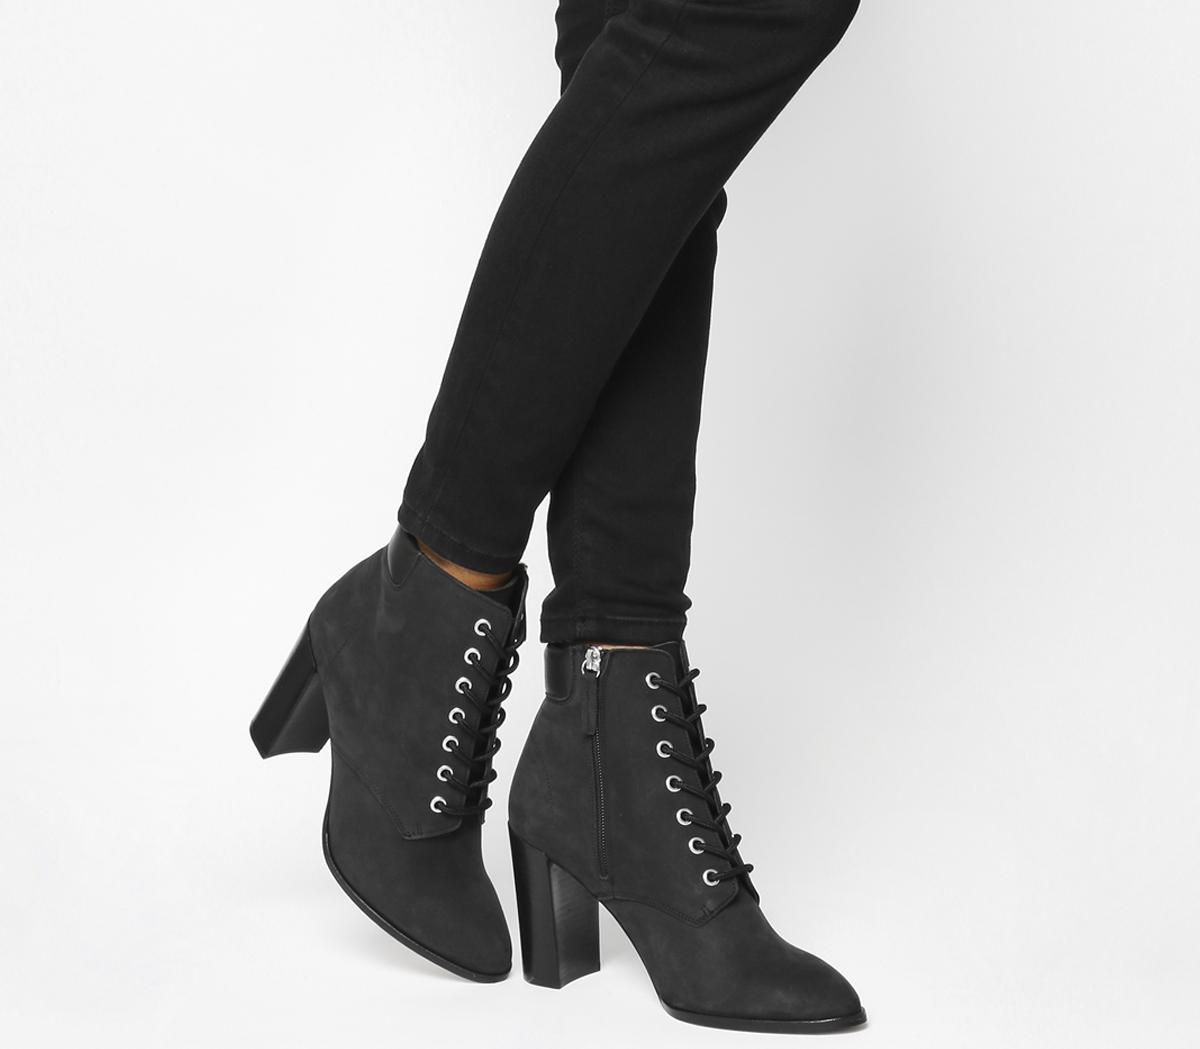 black high heel boots lace up